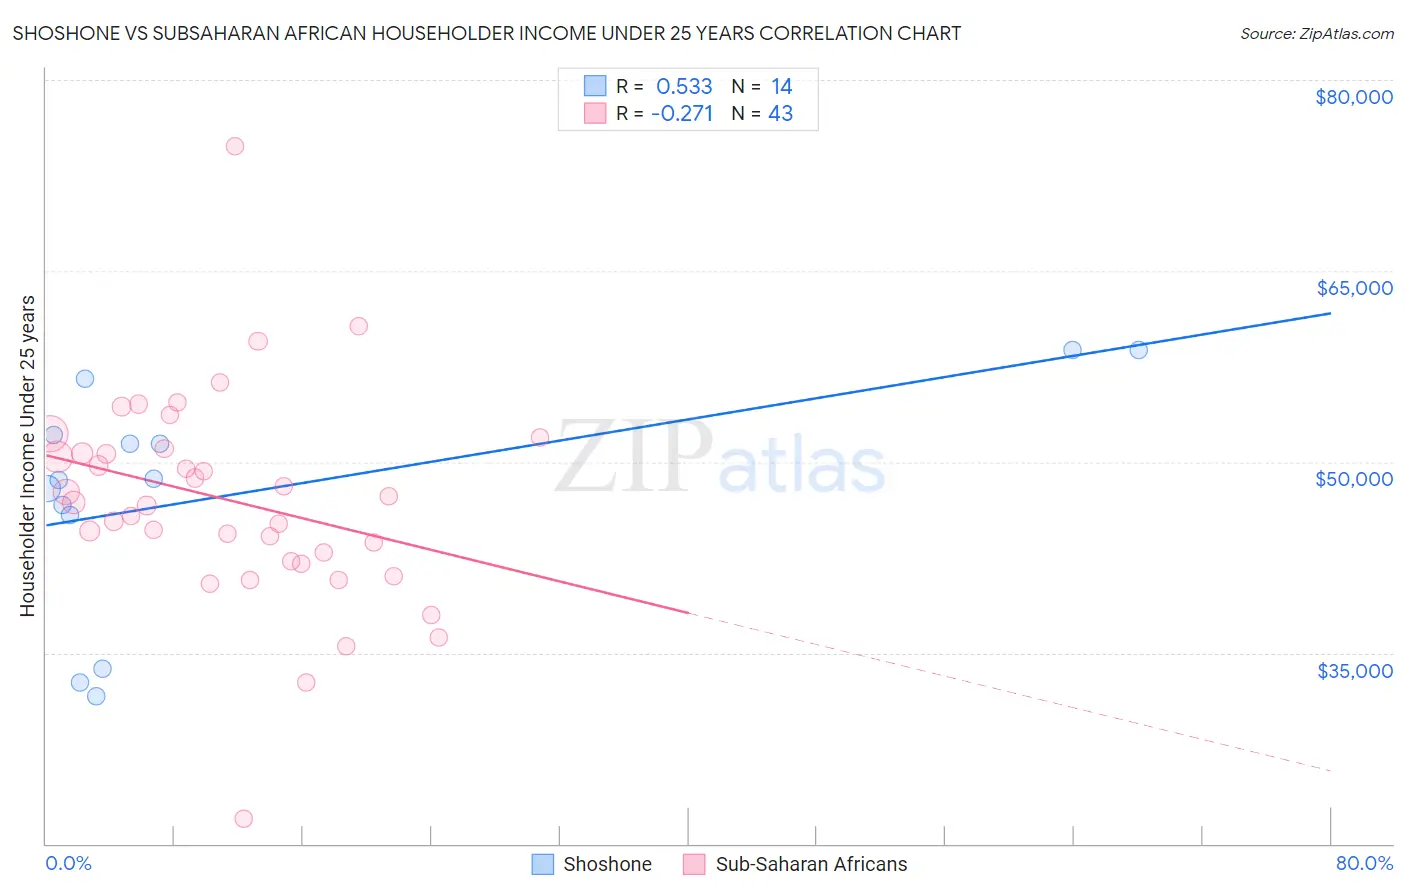 Shoshone vs Subsaharan African Householder Income Under 25 years